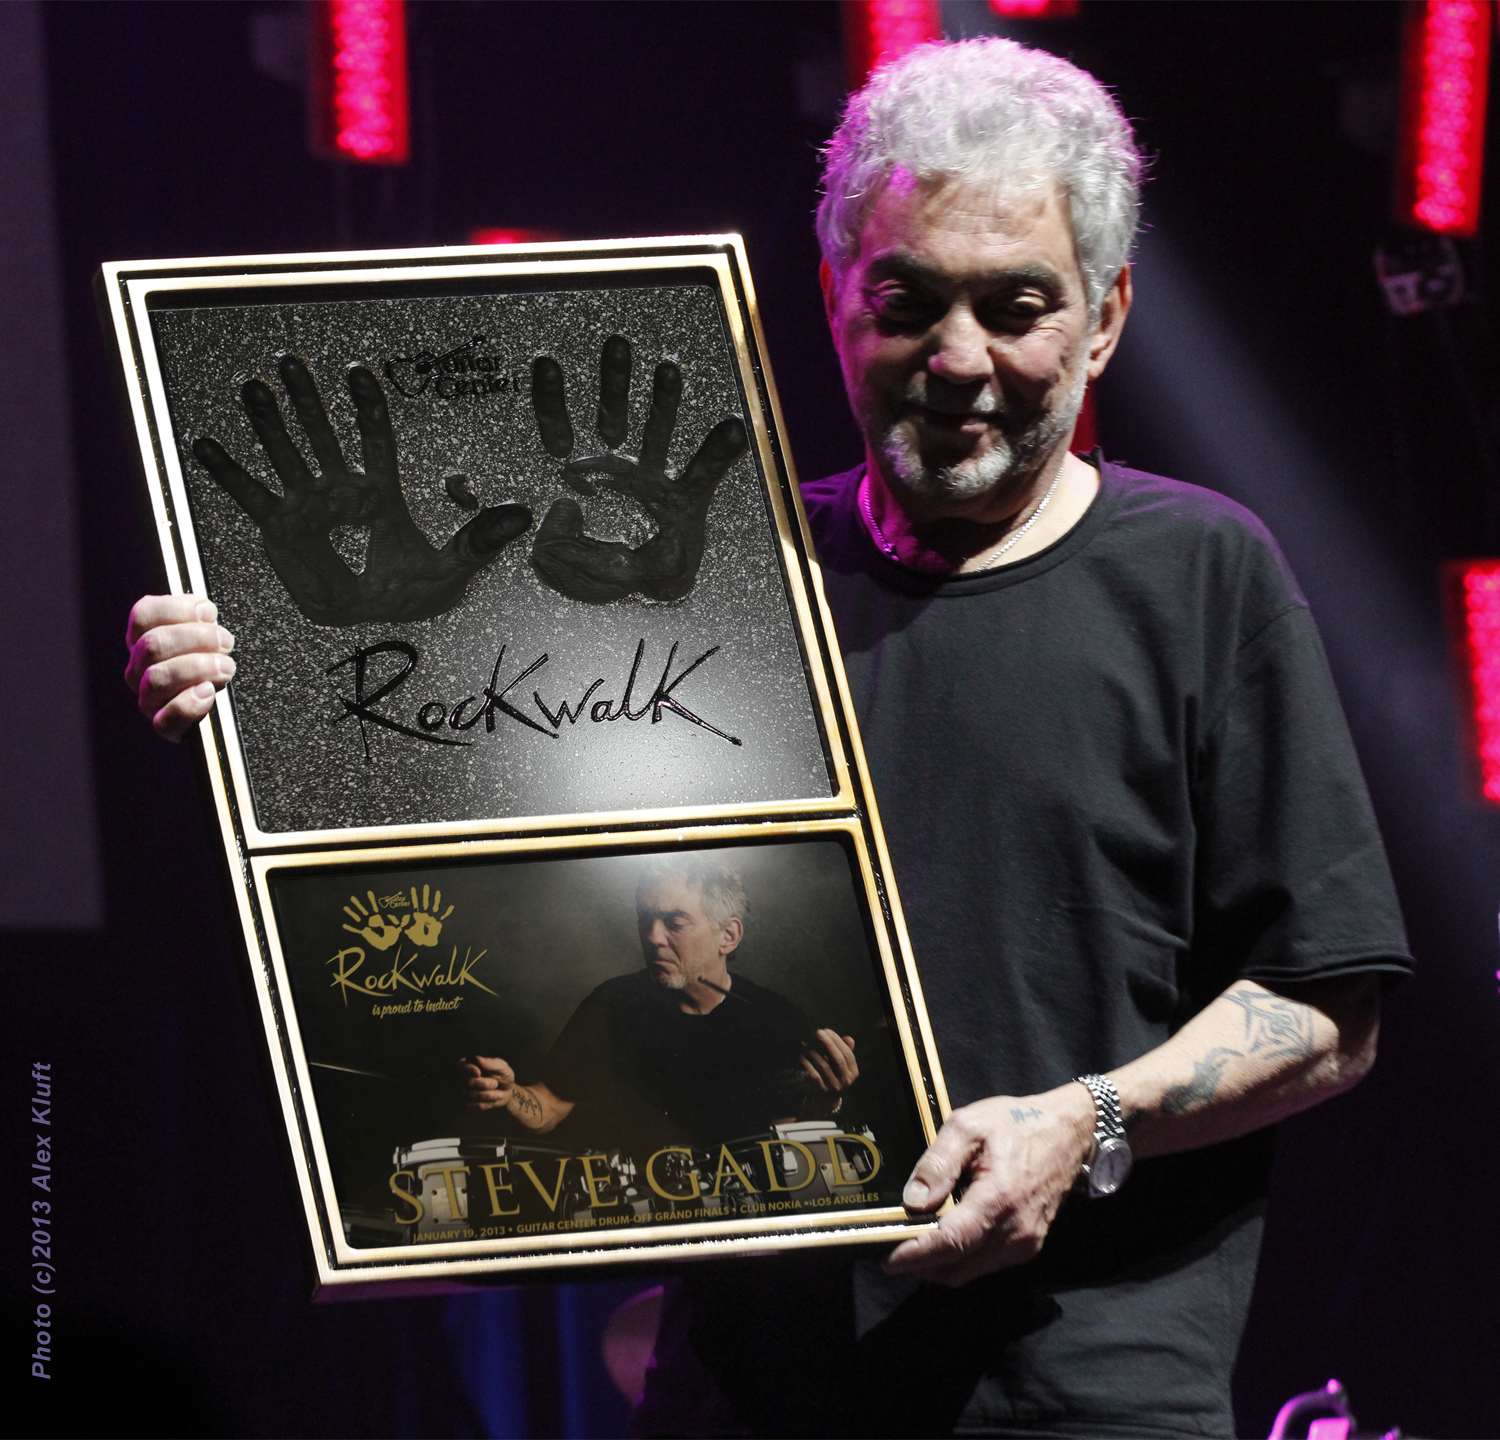 Rockwalk Induction of Steve Gadd March 2013 Plaque designed and produced by meredith Day, Dreamland 3D